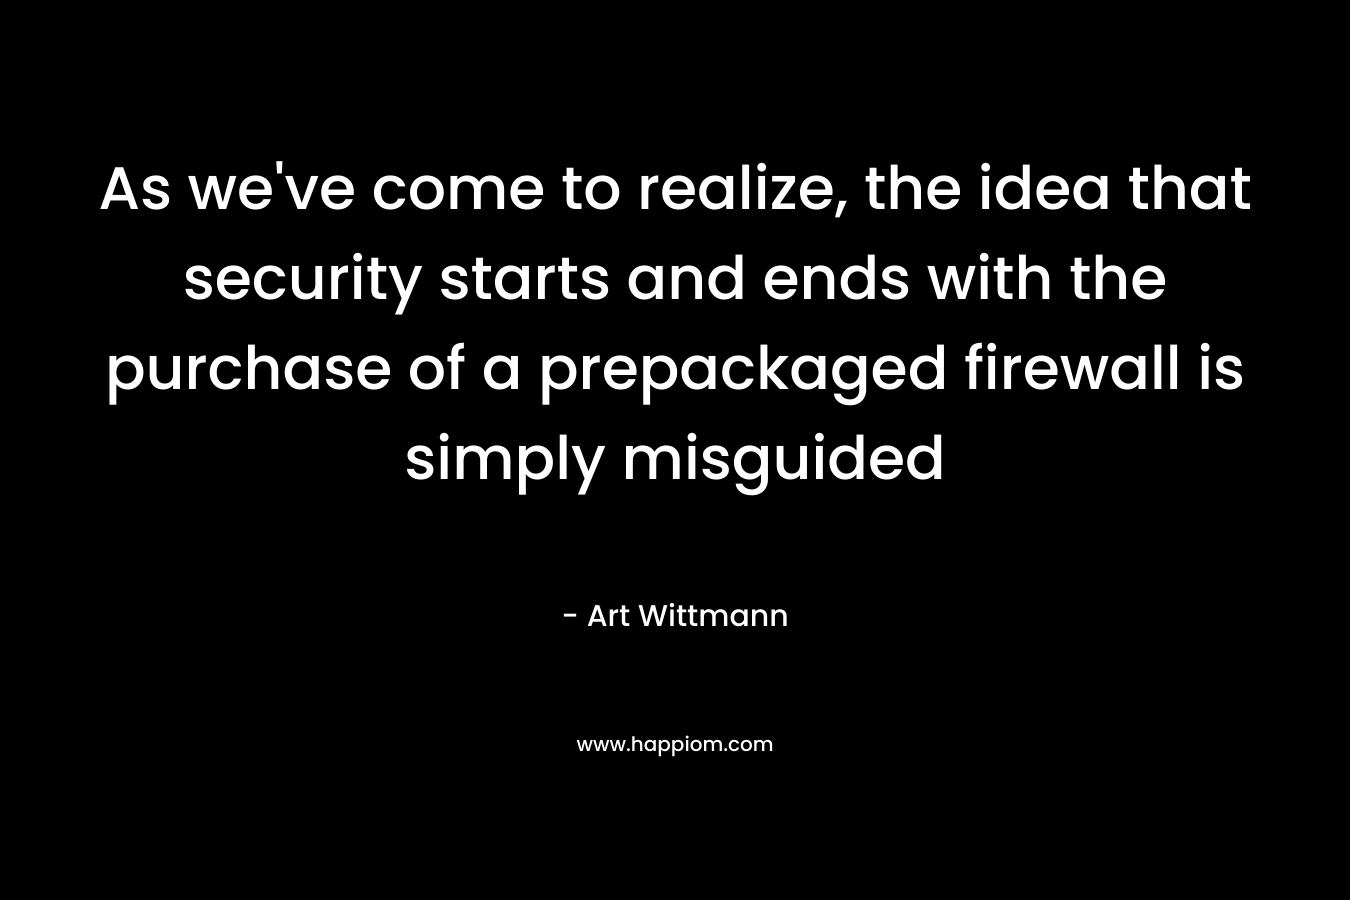 As we’ve come to realize, the idea that security starts and ends with the purchase of a prepackaged firewall is simply misguided – Art Wittmann